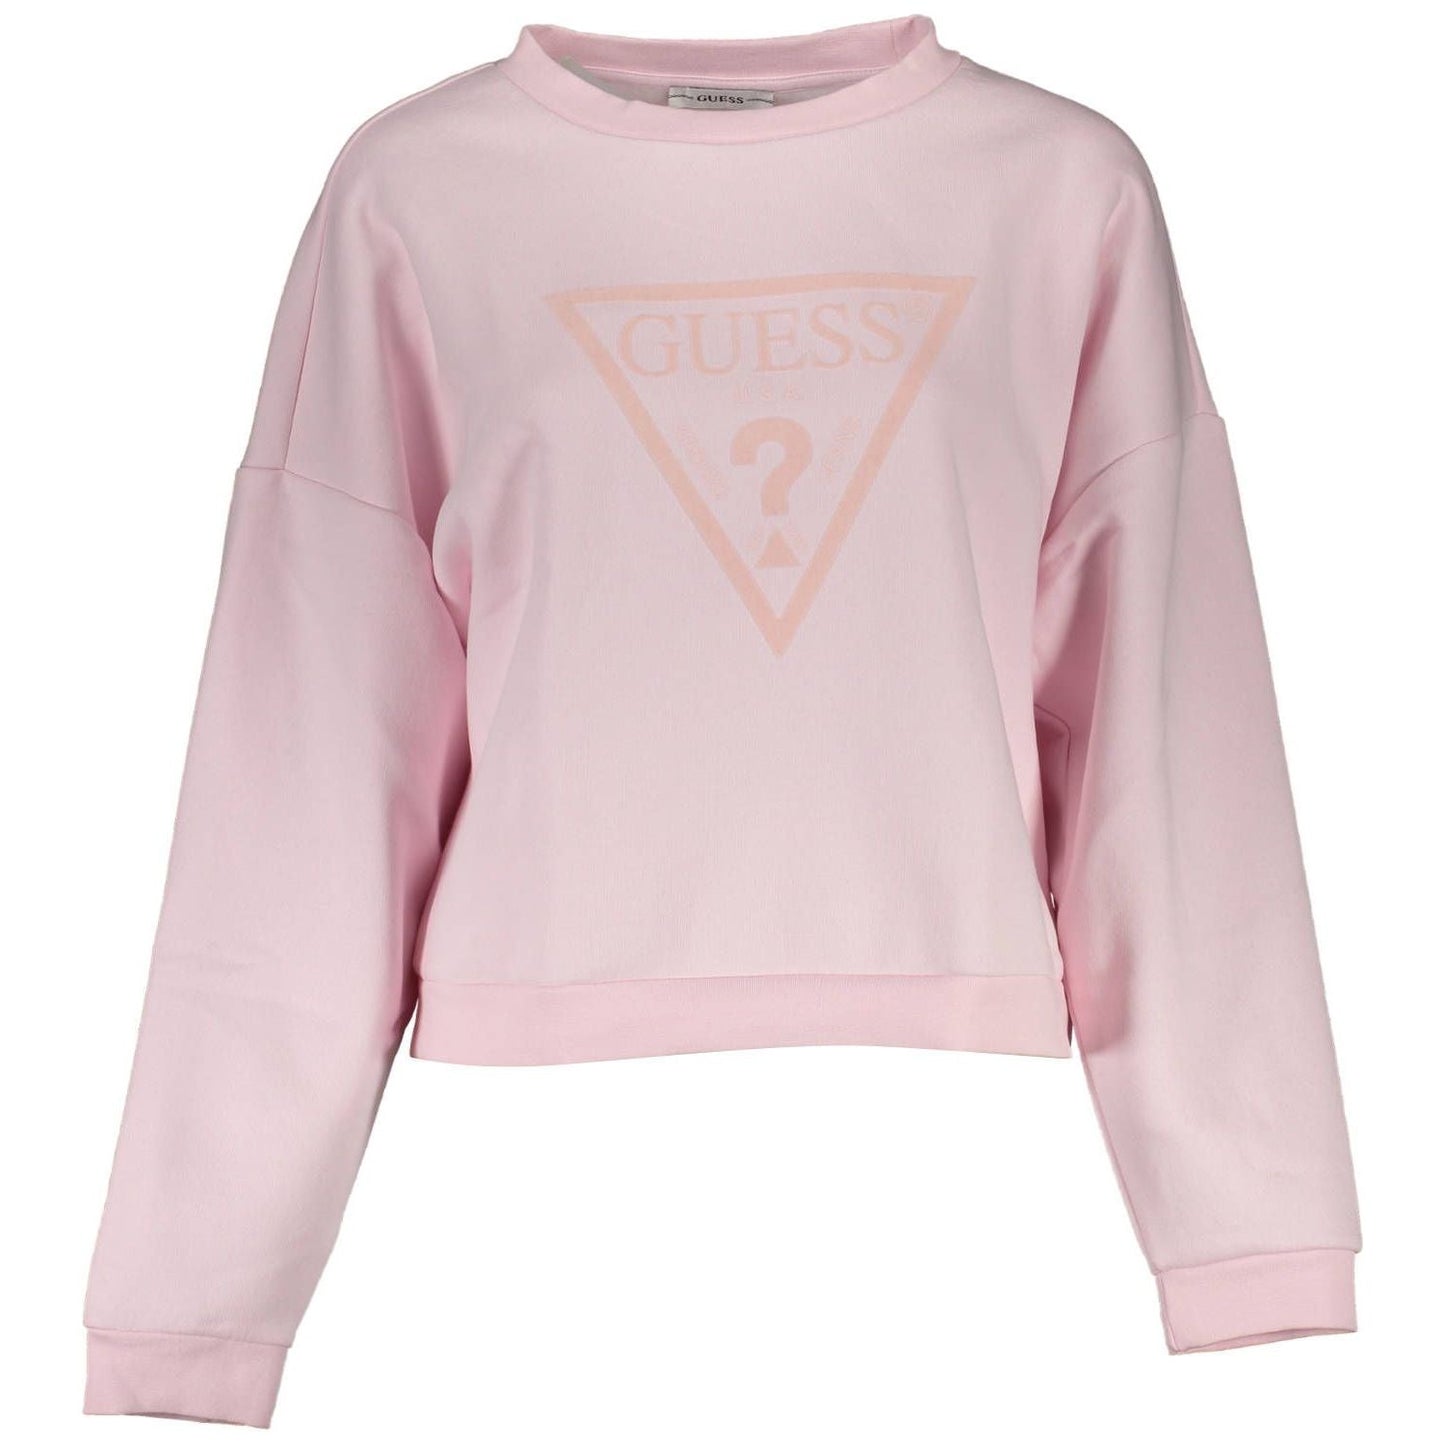 Guess Jeans Chic Pink Printed Organic Cotton Sweater chic-pink-printed-organic-cotton-sweater